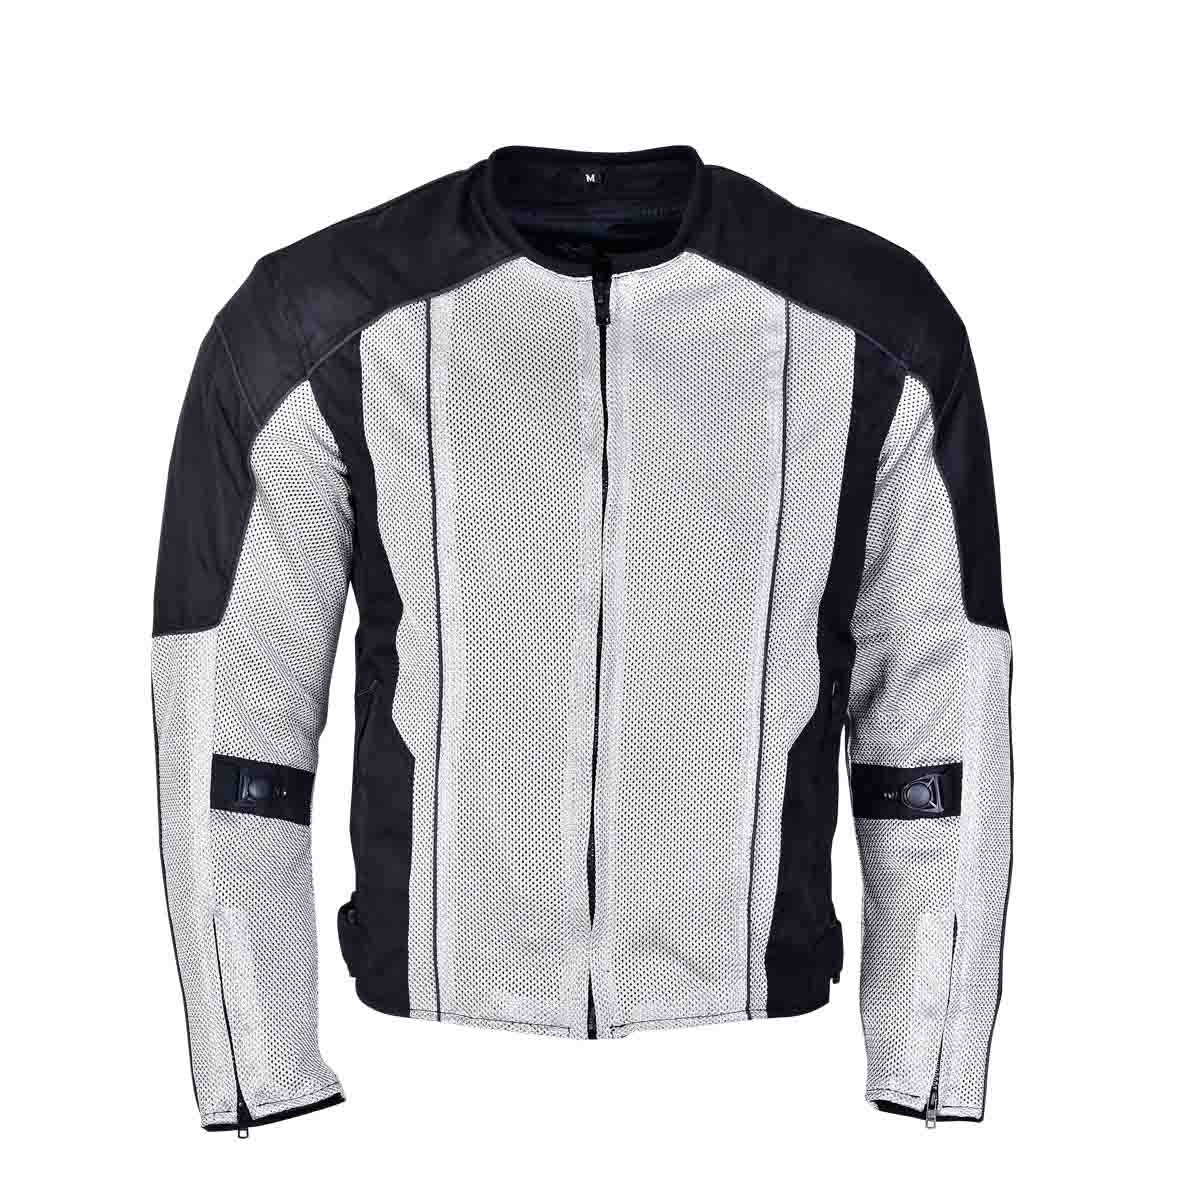 Vance Leathers VL1627SB Advanced 3-Season Mesh/Textile CE Armor Motorcycle  Jacket in Leather Jackets & Clothing - $89.95